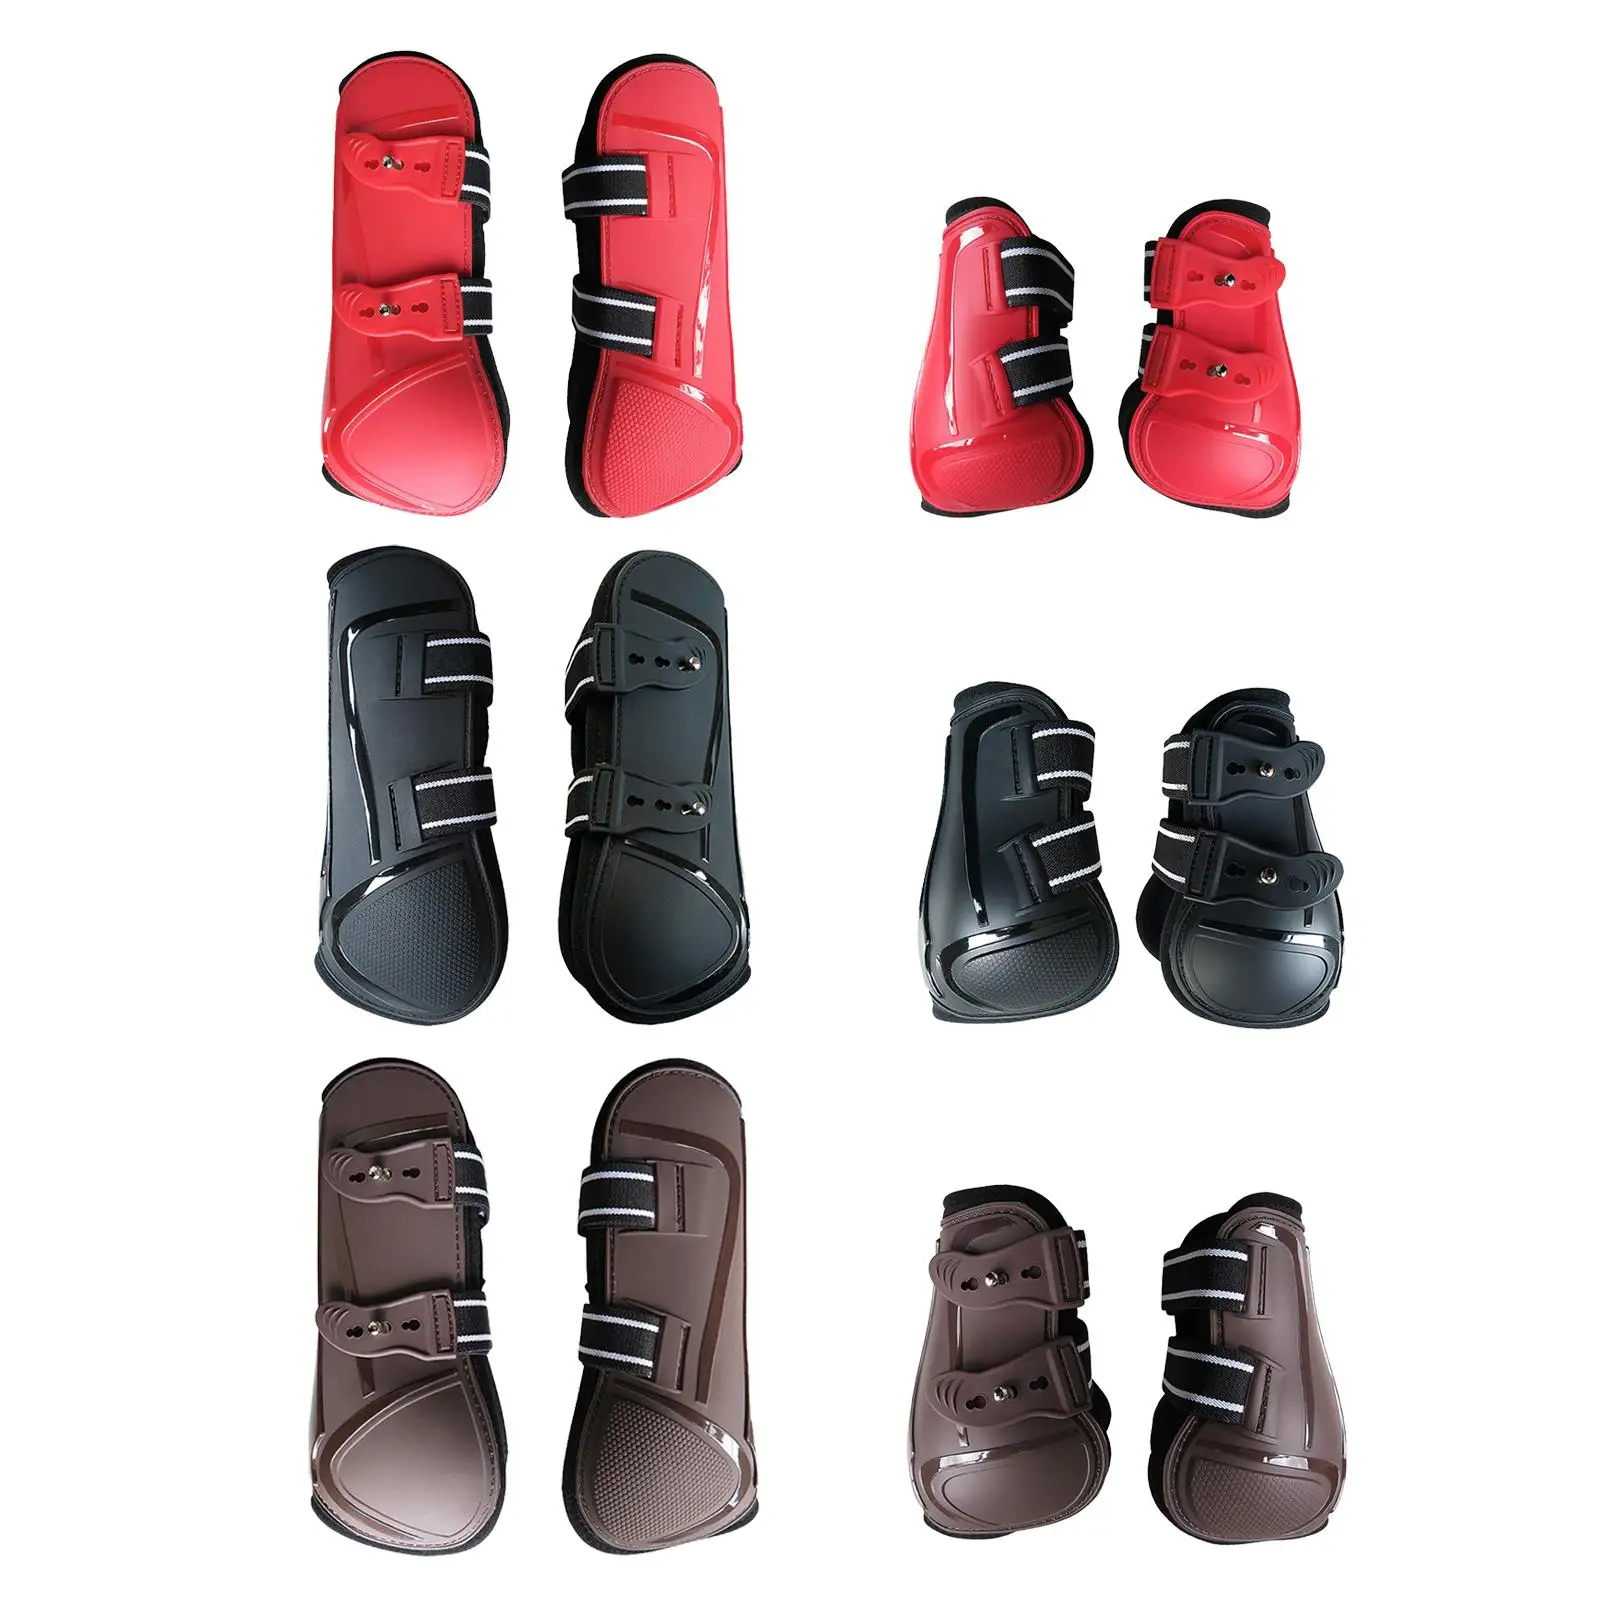 4 Pieces Front Hind Legs Jumping Tendon Horses Boots, Secure Leg Protection,